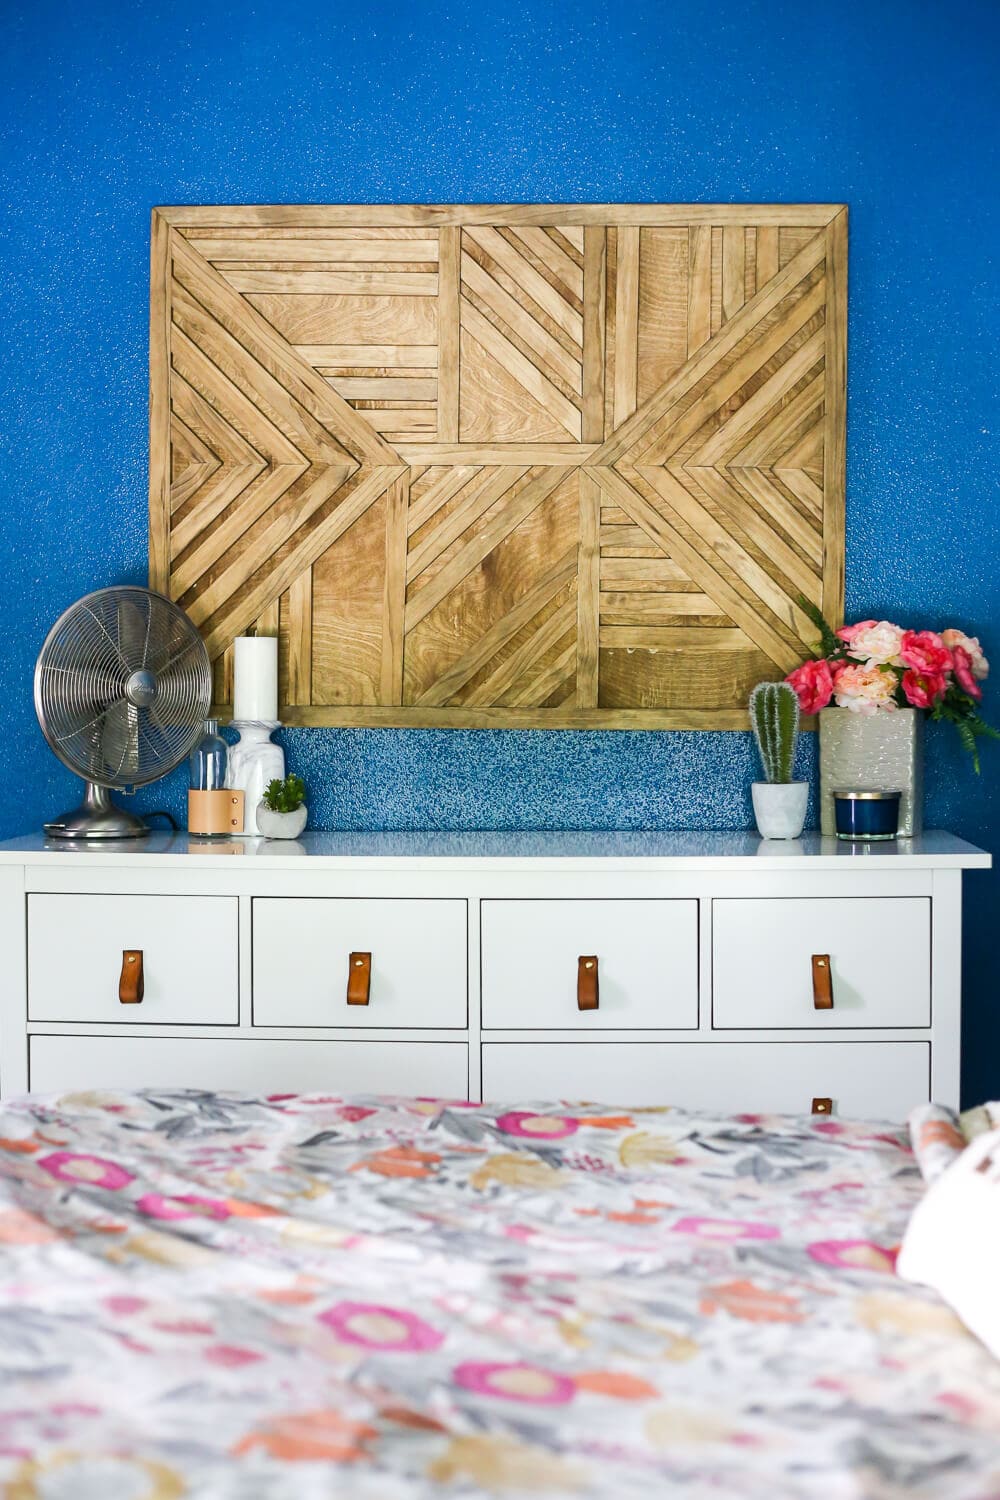 DIY Wood Wall Art - How to Make Your Own Love 